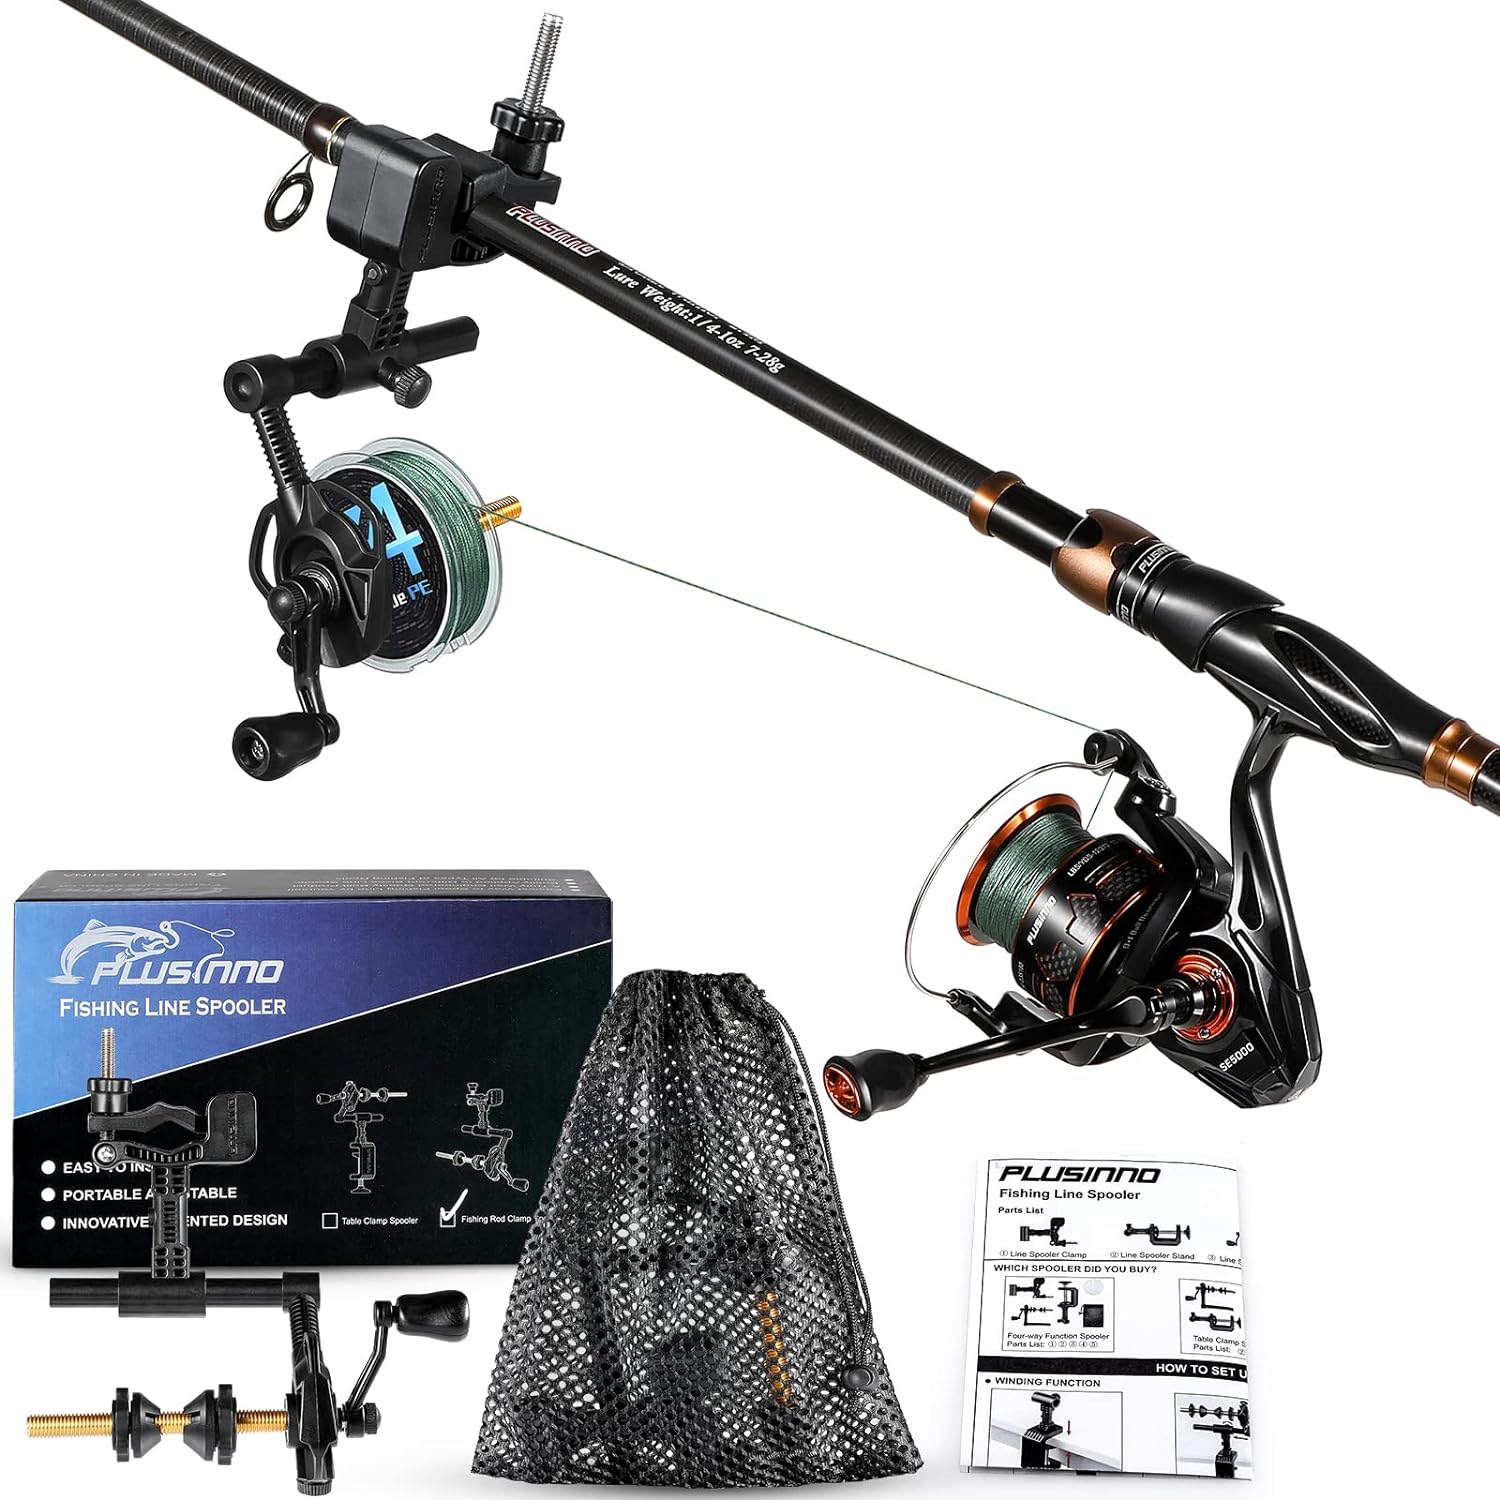 Fishing line Spooling Station Versatile for Both Thick & Thin Rods Cast Reel Without Line Twist PLUSINNO Fishing Line Spooler with Unwinding Function Works with Spinning Reel